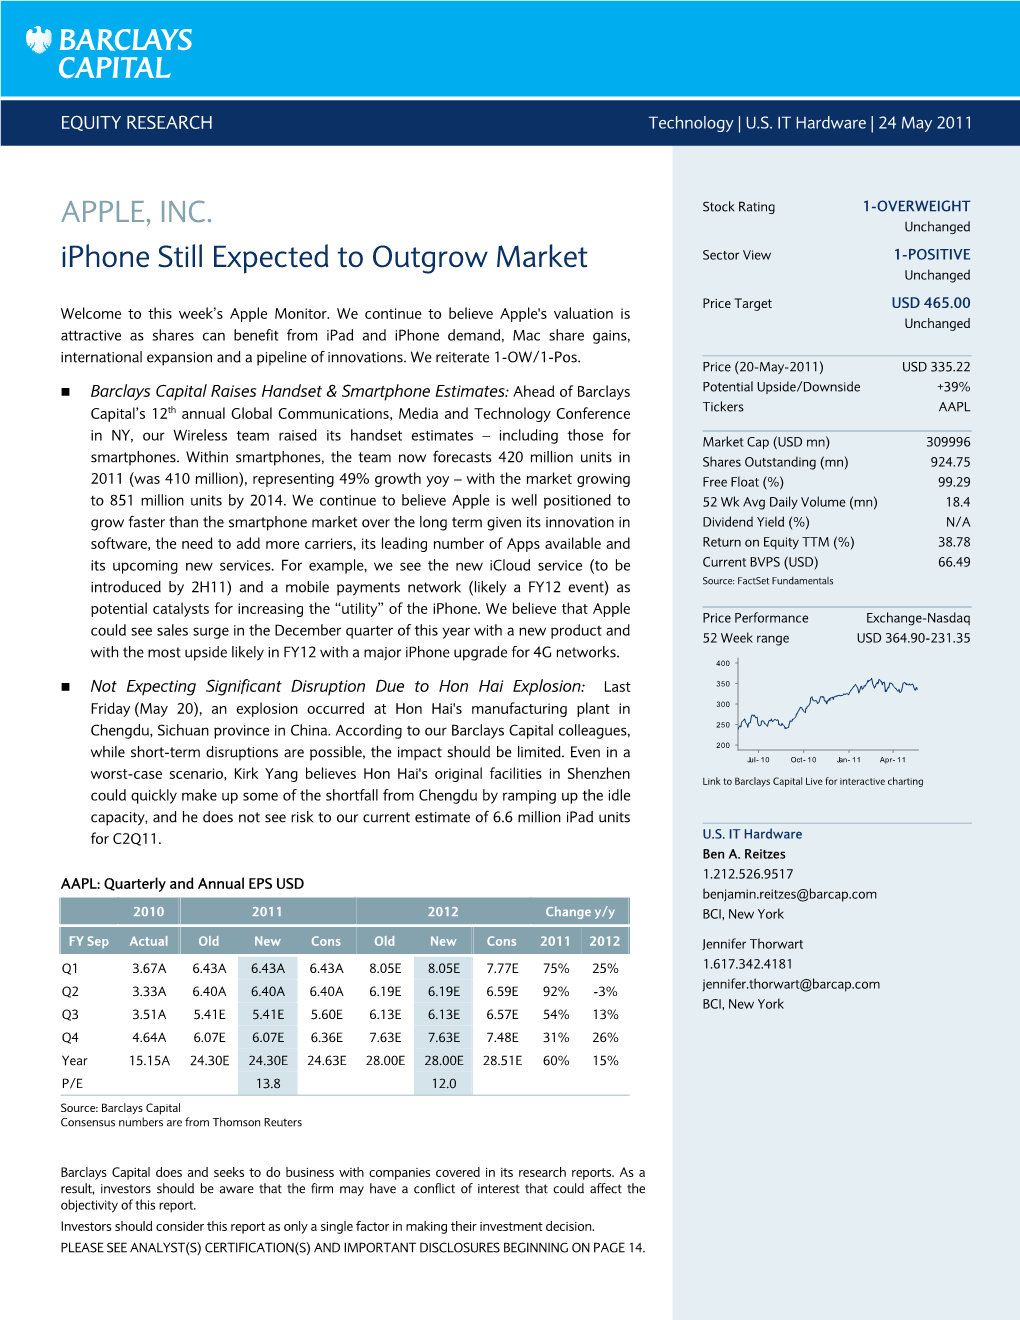 APPLE, INC. Iphone Still Expected to Outgrow Market